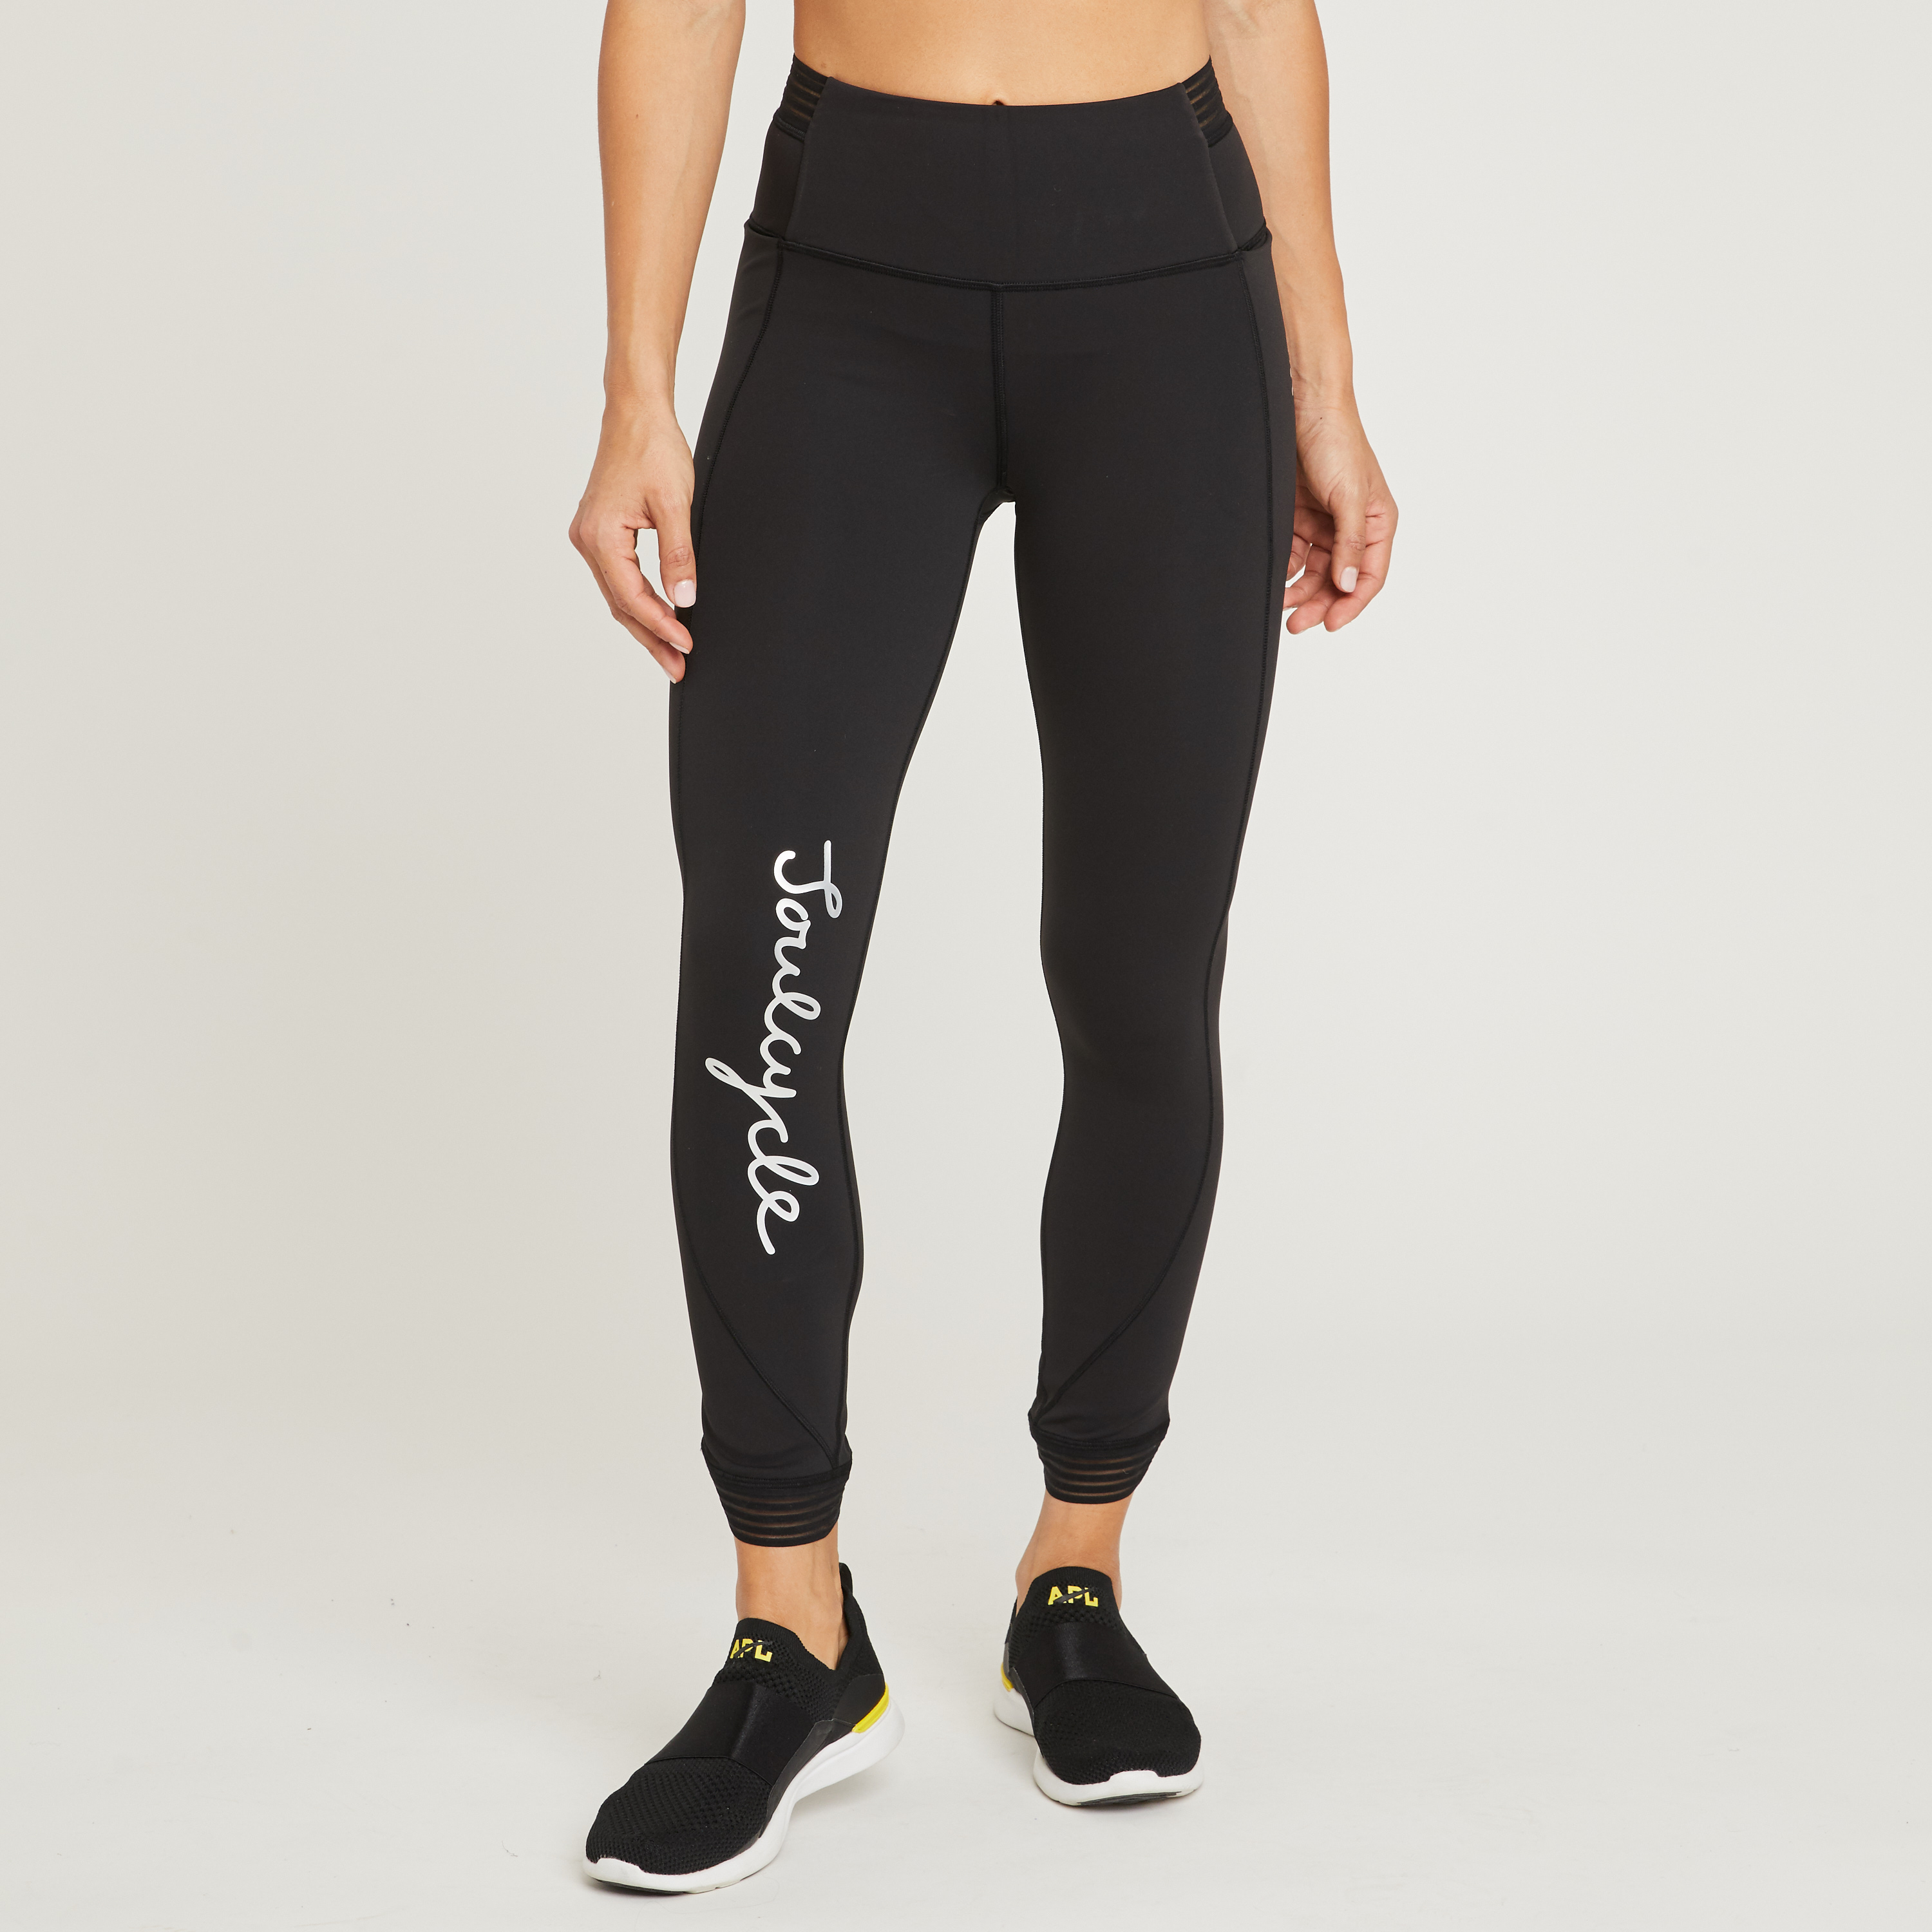 lululemon Find Focus Tight Core - SoulCycle Shop